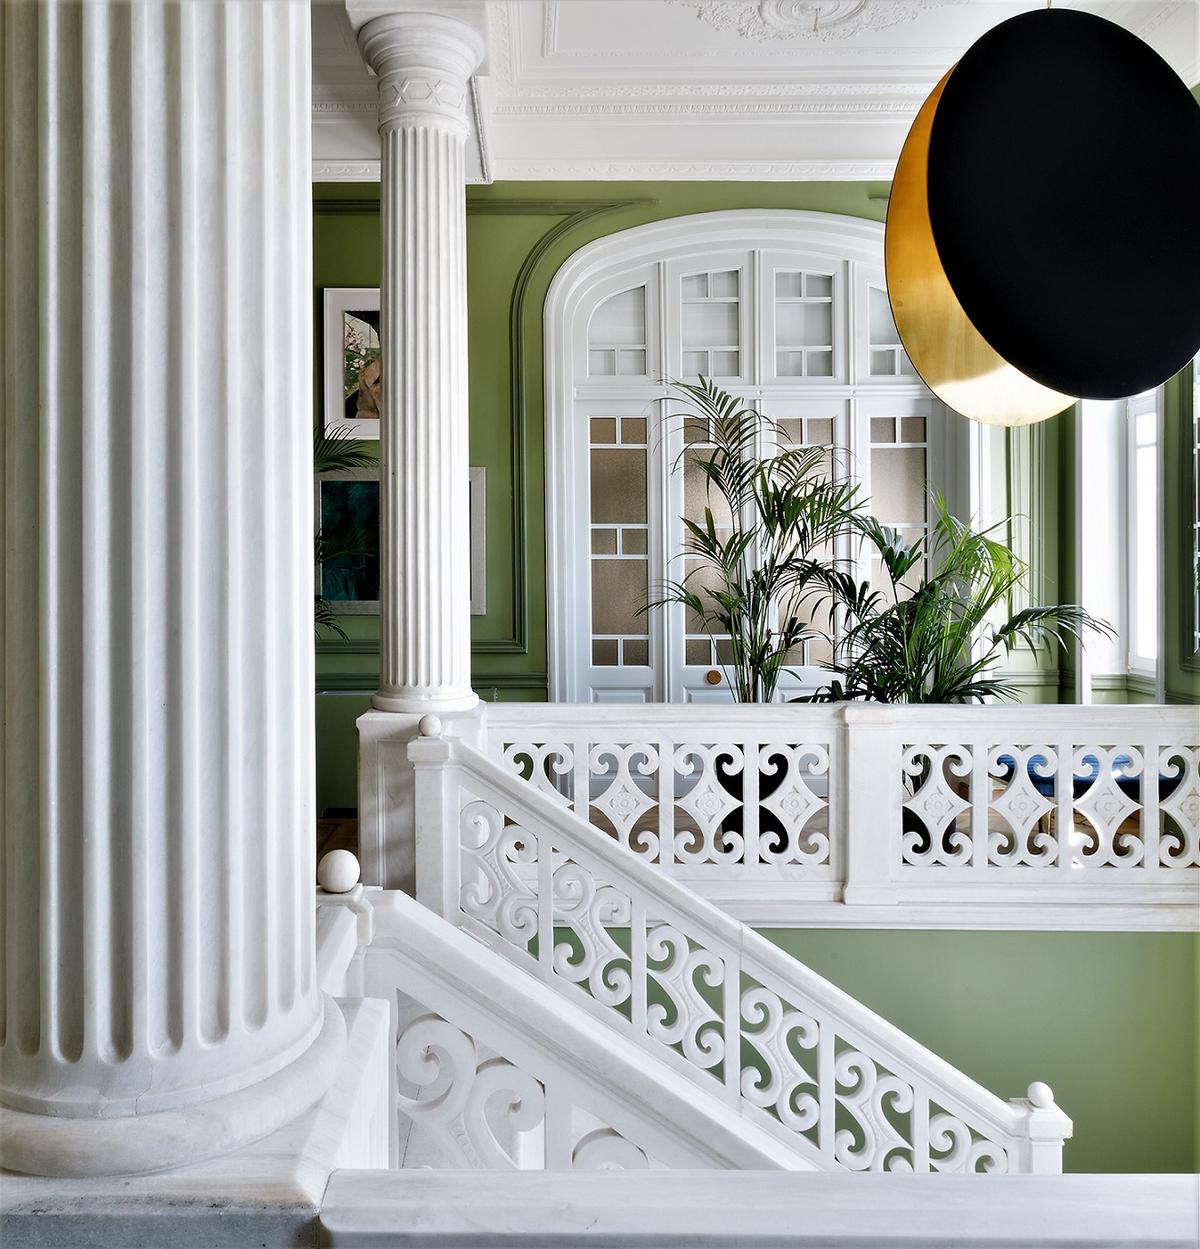 The home’s foyer features a classic marble staircase with Doric columns. Verdant colors and contrasts combined with grand dimensions to create an air of luxury. (Courtesy of Greece Sotheby’s International Realty)